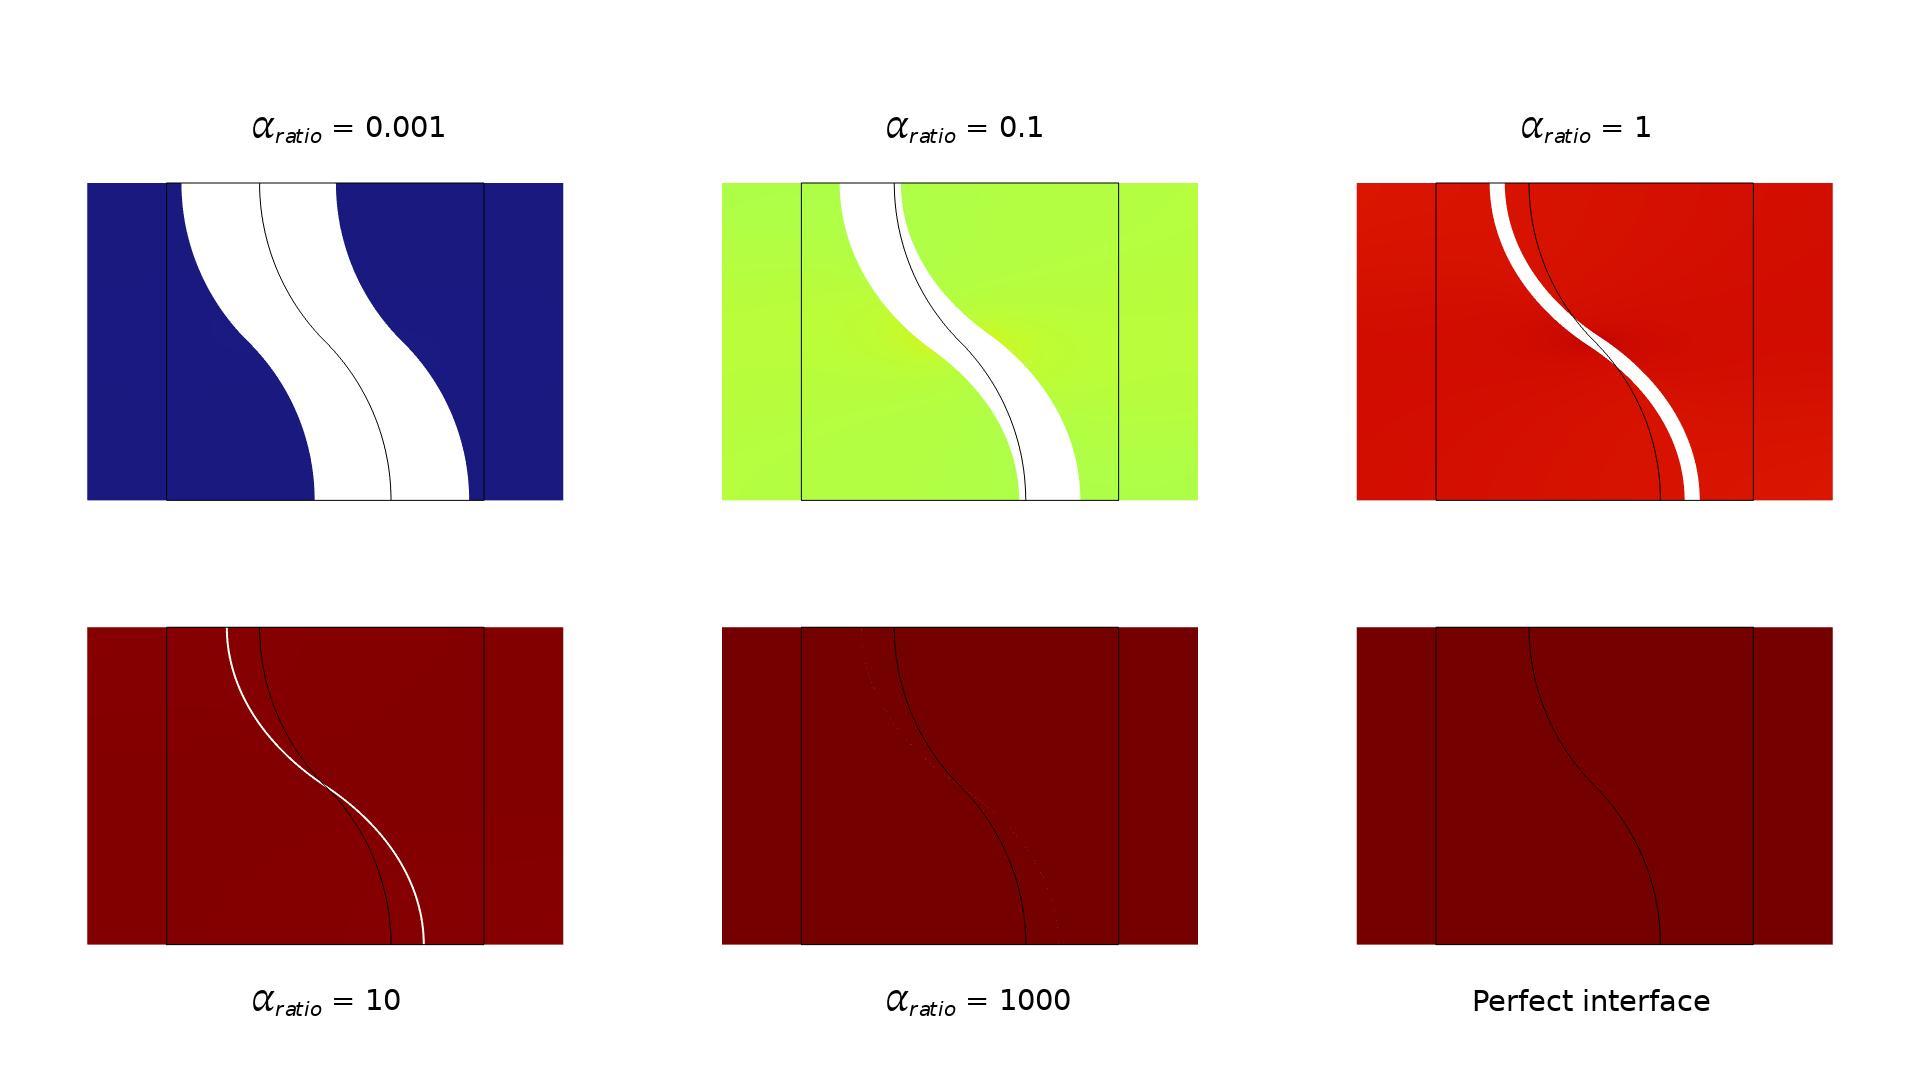 Six results of a thin layer model showing the behavior of a soft material between rigid material.